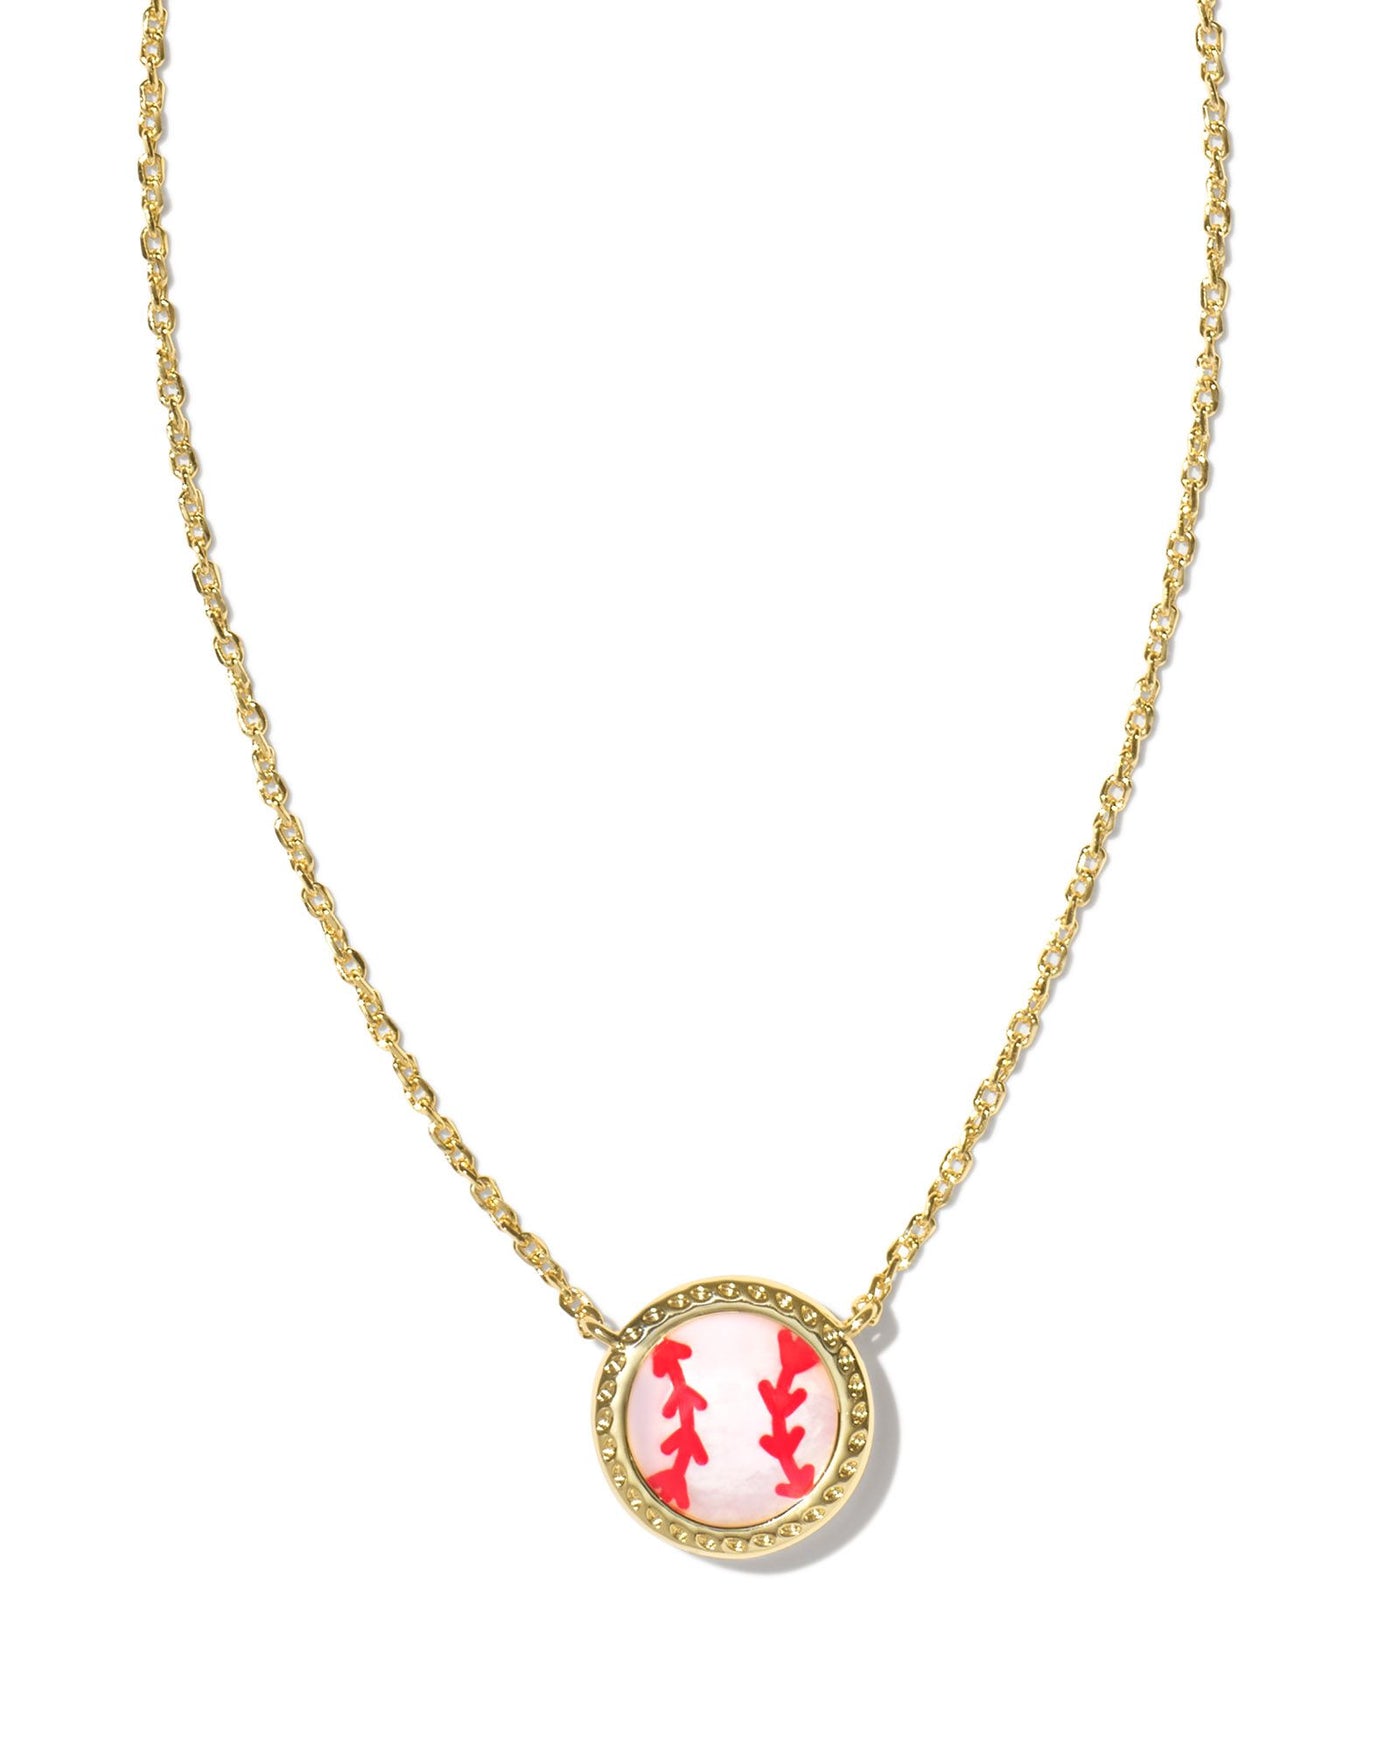 Kendra Scott Baseball Pendant Necklace in Gold on white background close up.